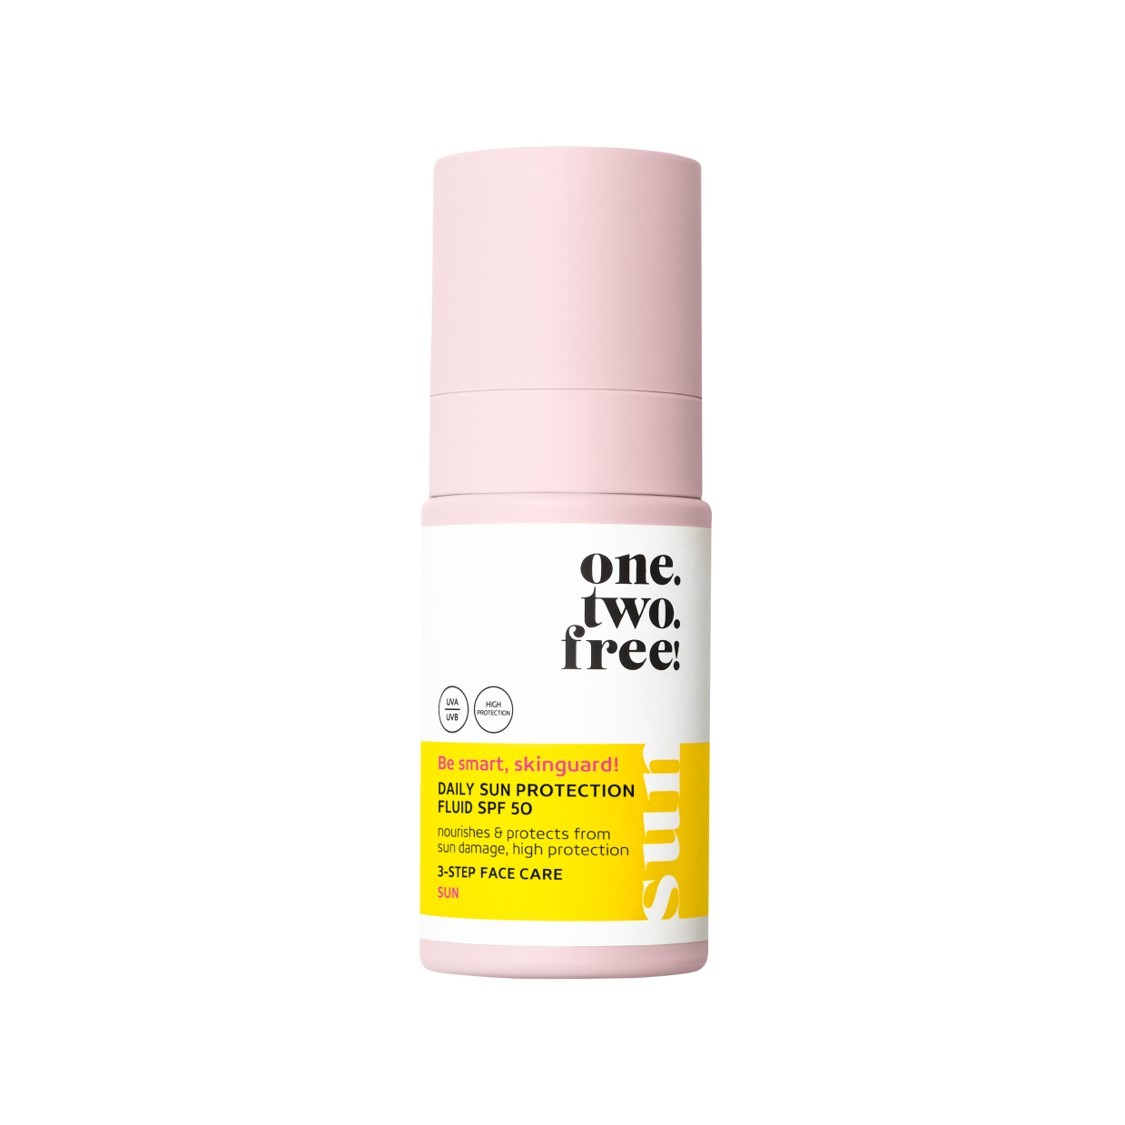 one.two.free! - Sun Protection Fluid SPF50 - 